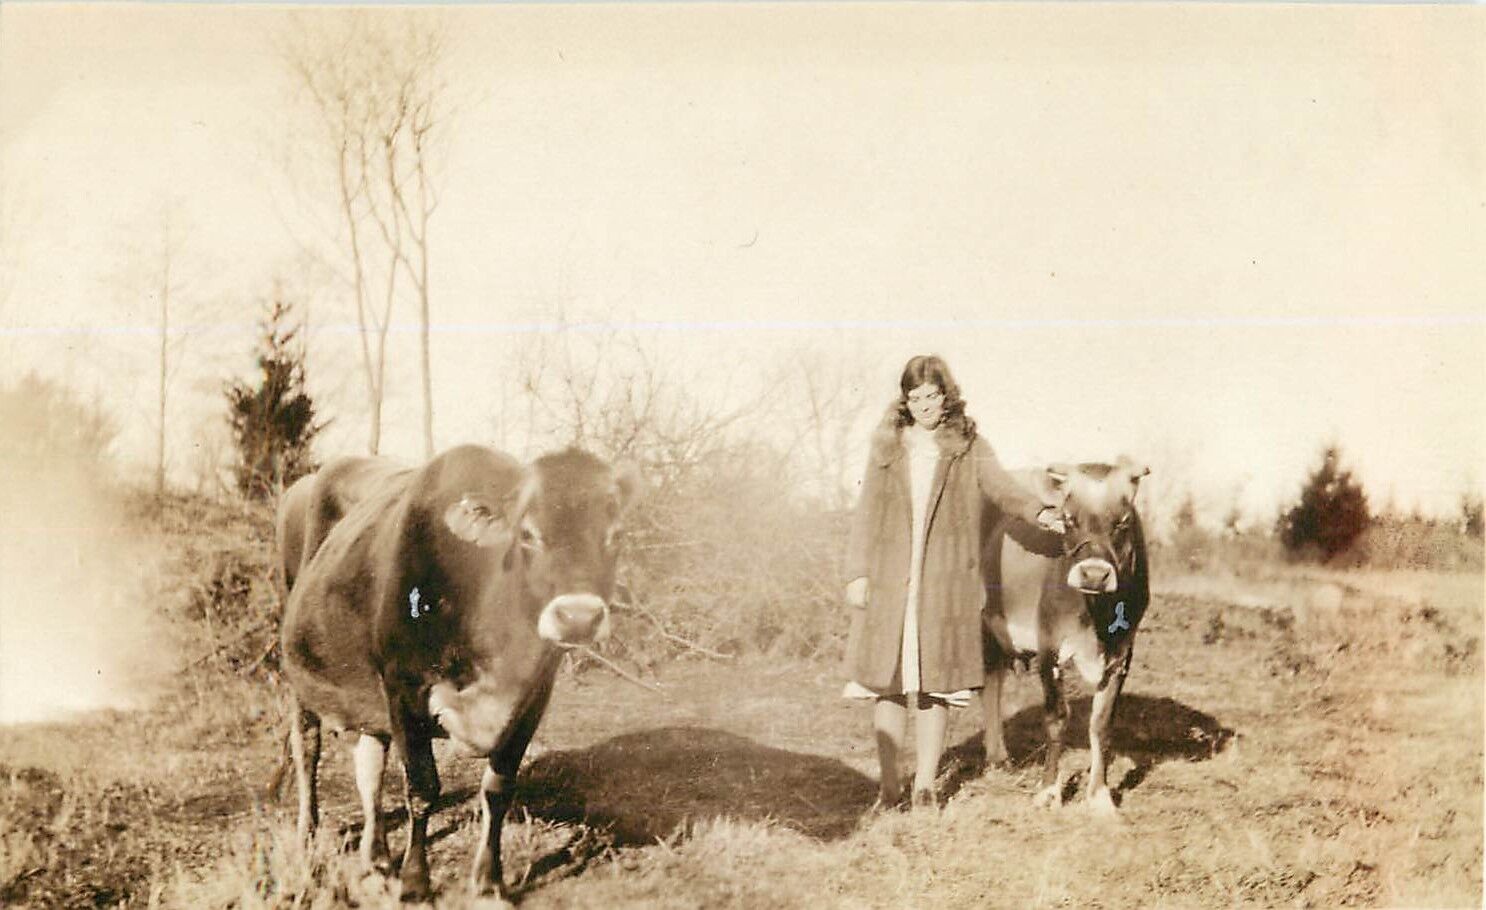 1930s RPPC Postcard; Young Woman & Jersey Dairy Cows, Unknown US Location